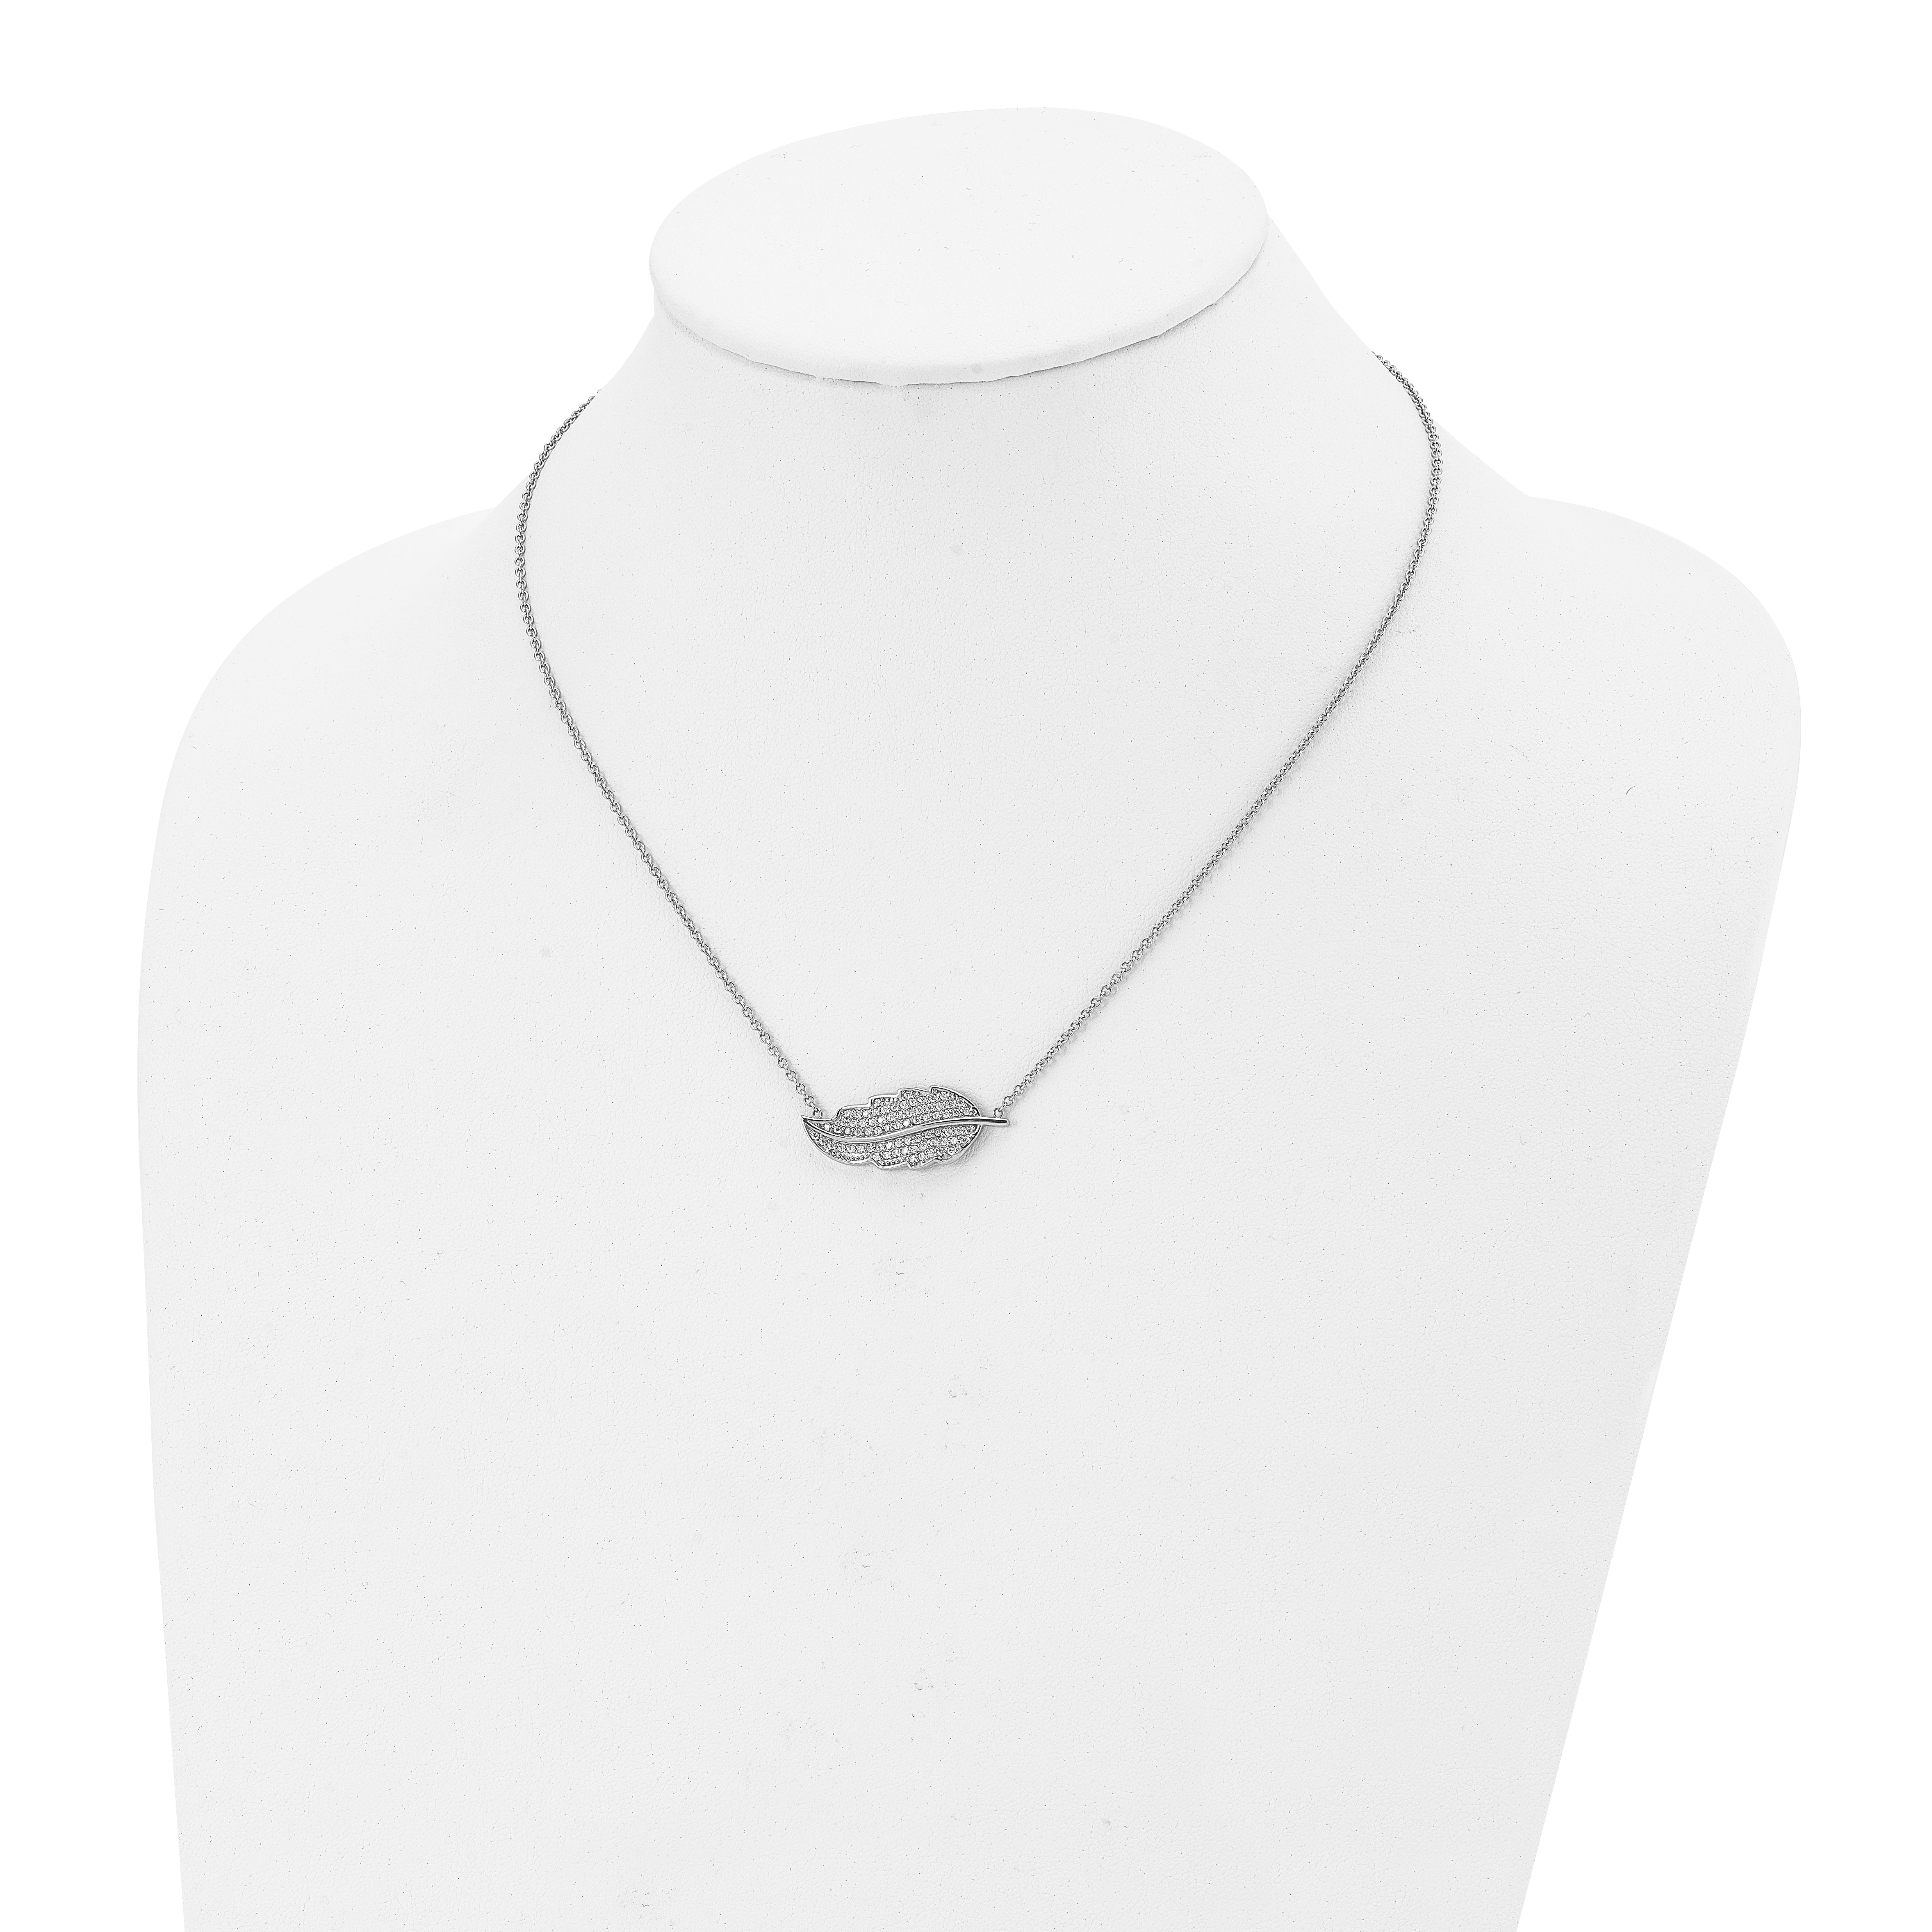 Stainless Steel Polished w/CZ Leaf 18in Necklace